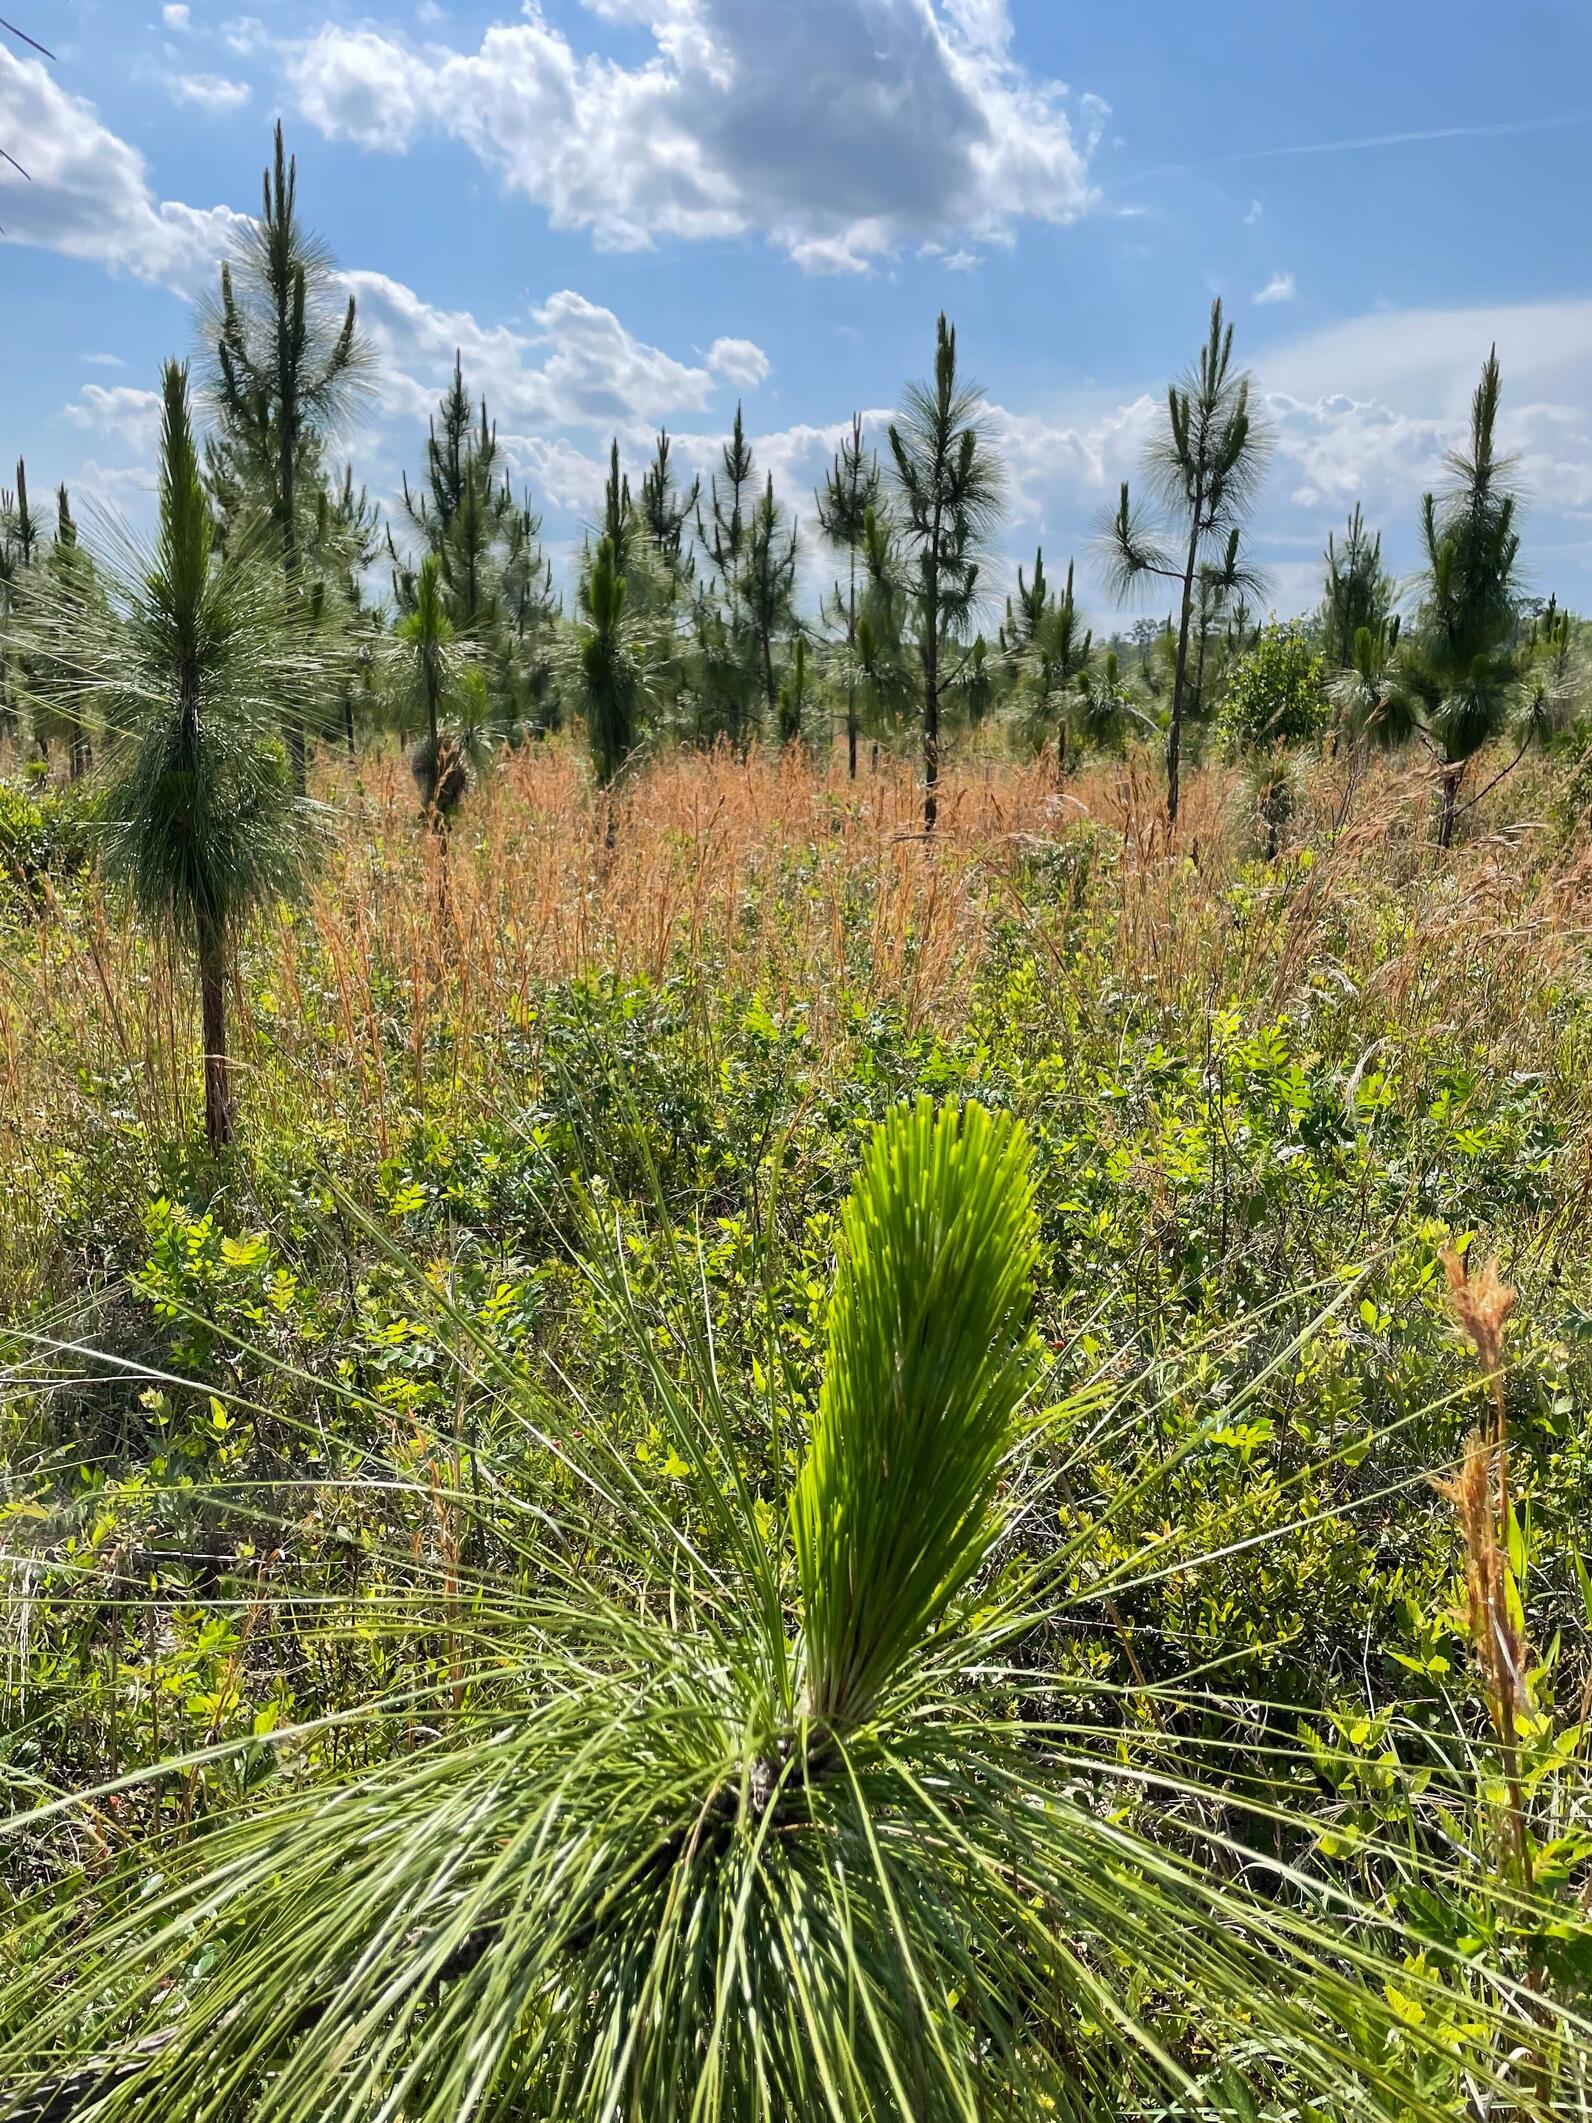 5 year old restored longleaf pines and recovering grassland savanna habitat cover 186 acres of the 380 acre Dean Swamp (Williams) tract, the newest addition to the Beidler Forest Center and Sanctuary.  The restoration of this tract was part of the mitigat